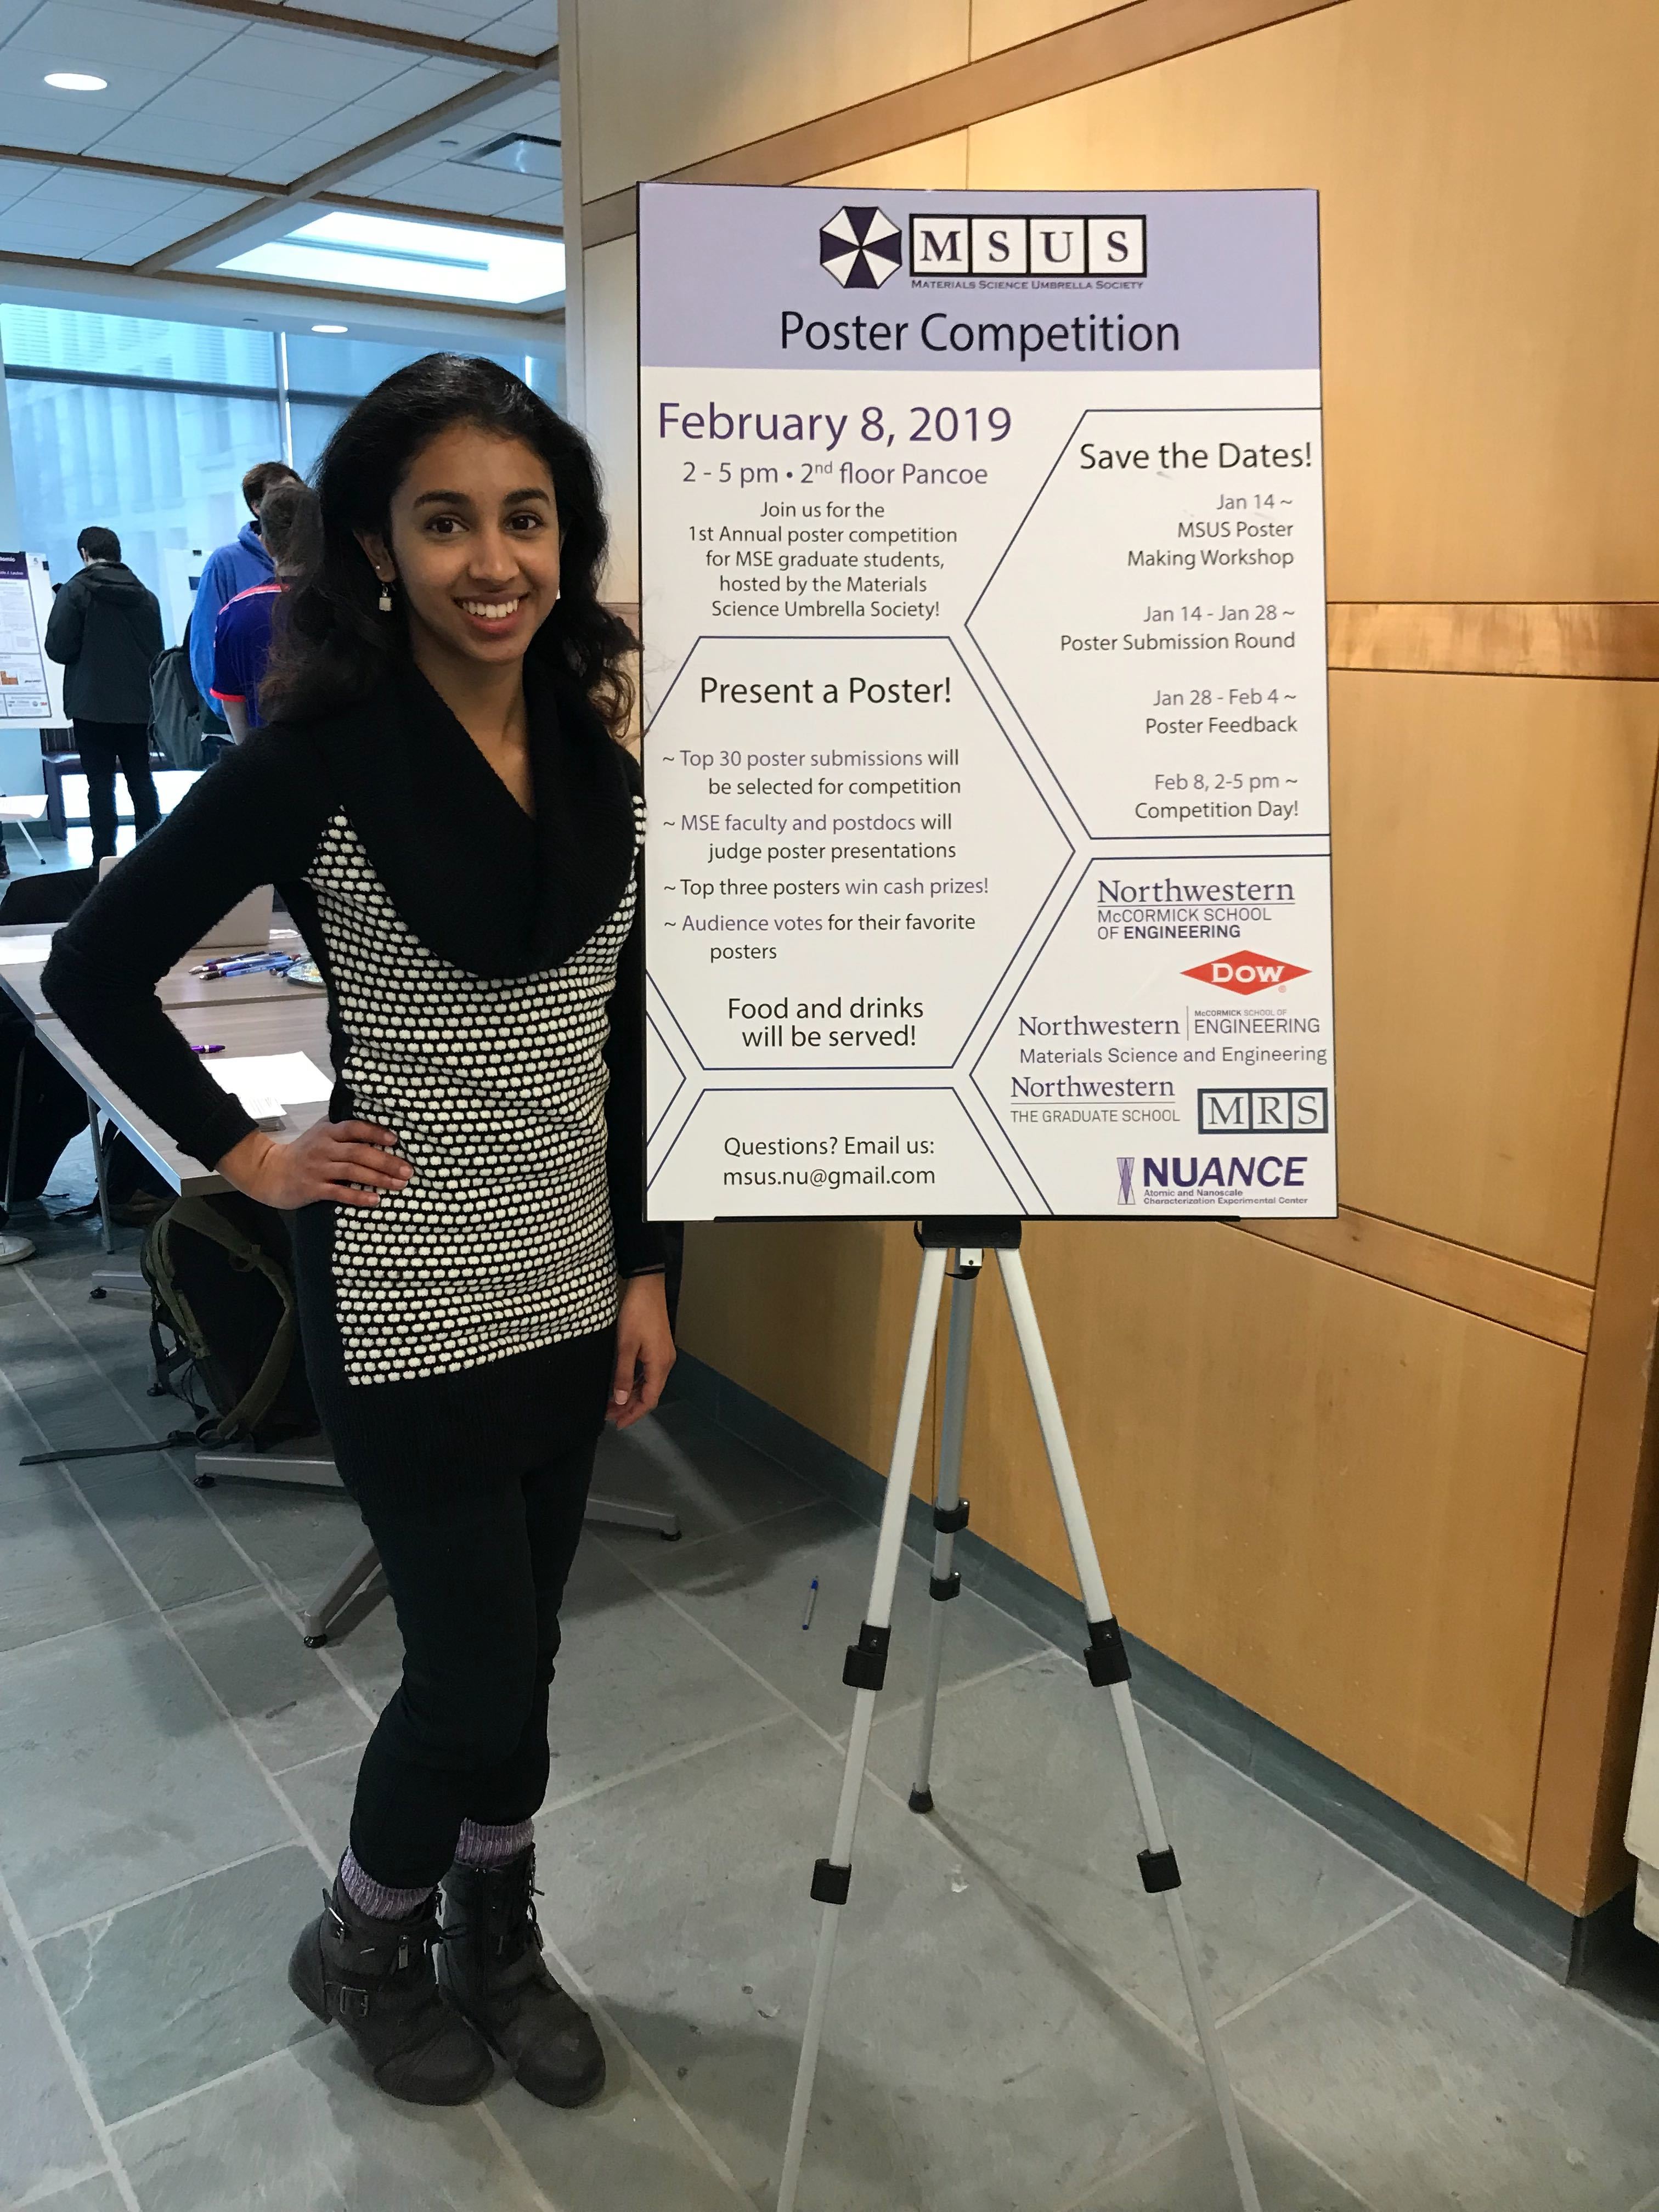 Welcome to the 2019 MSUS Poster Competition!